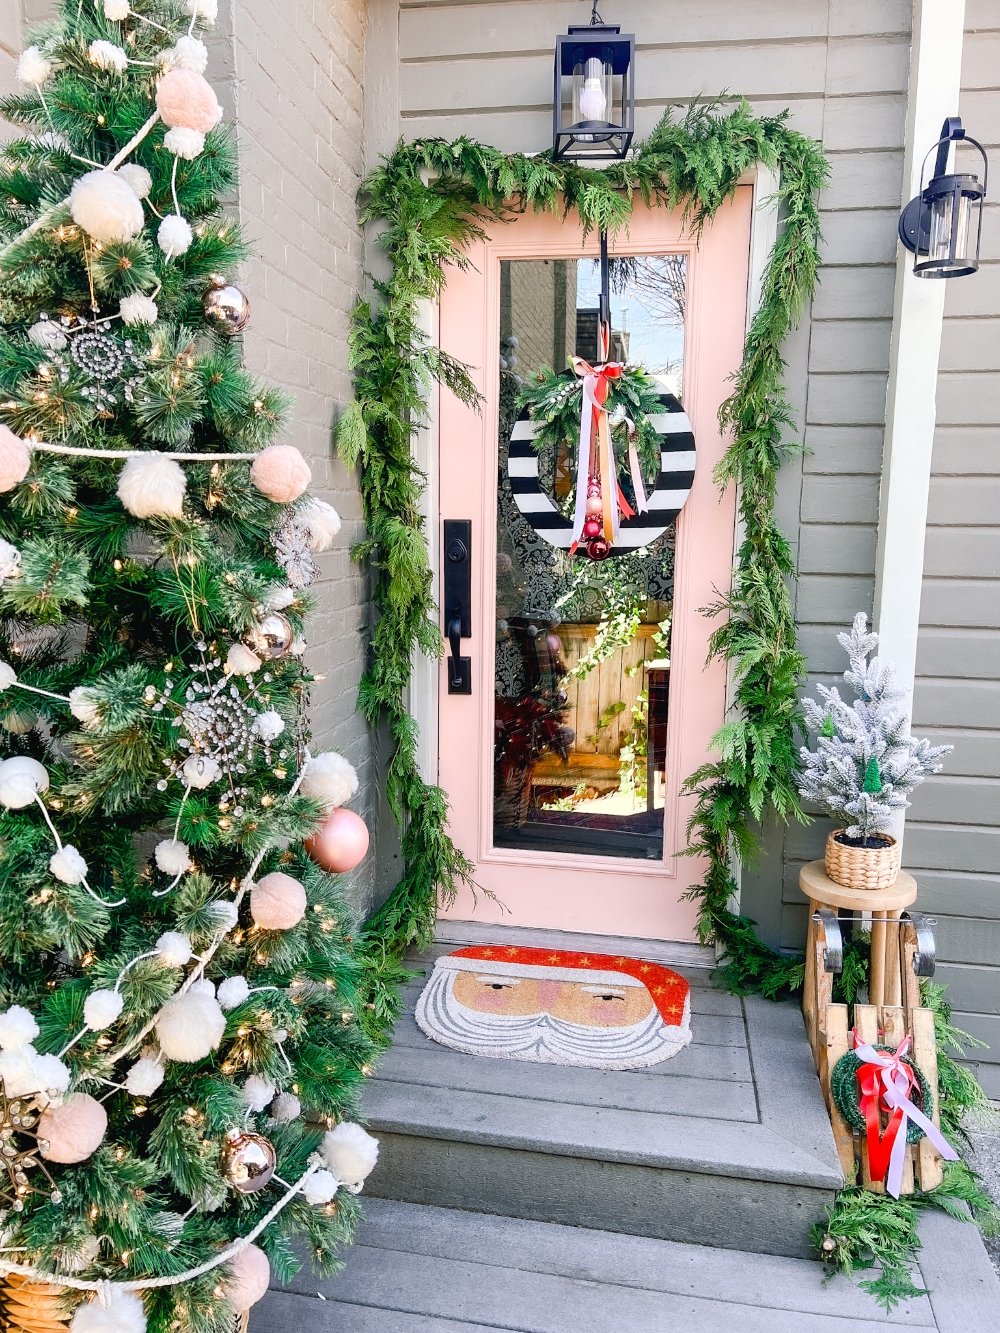 Back porch gets a Christmas makeover! Love the pink door and the Santa doormat